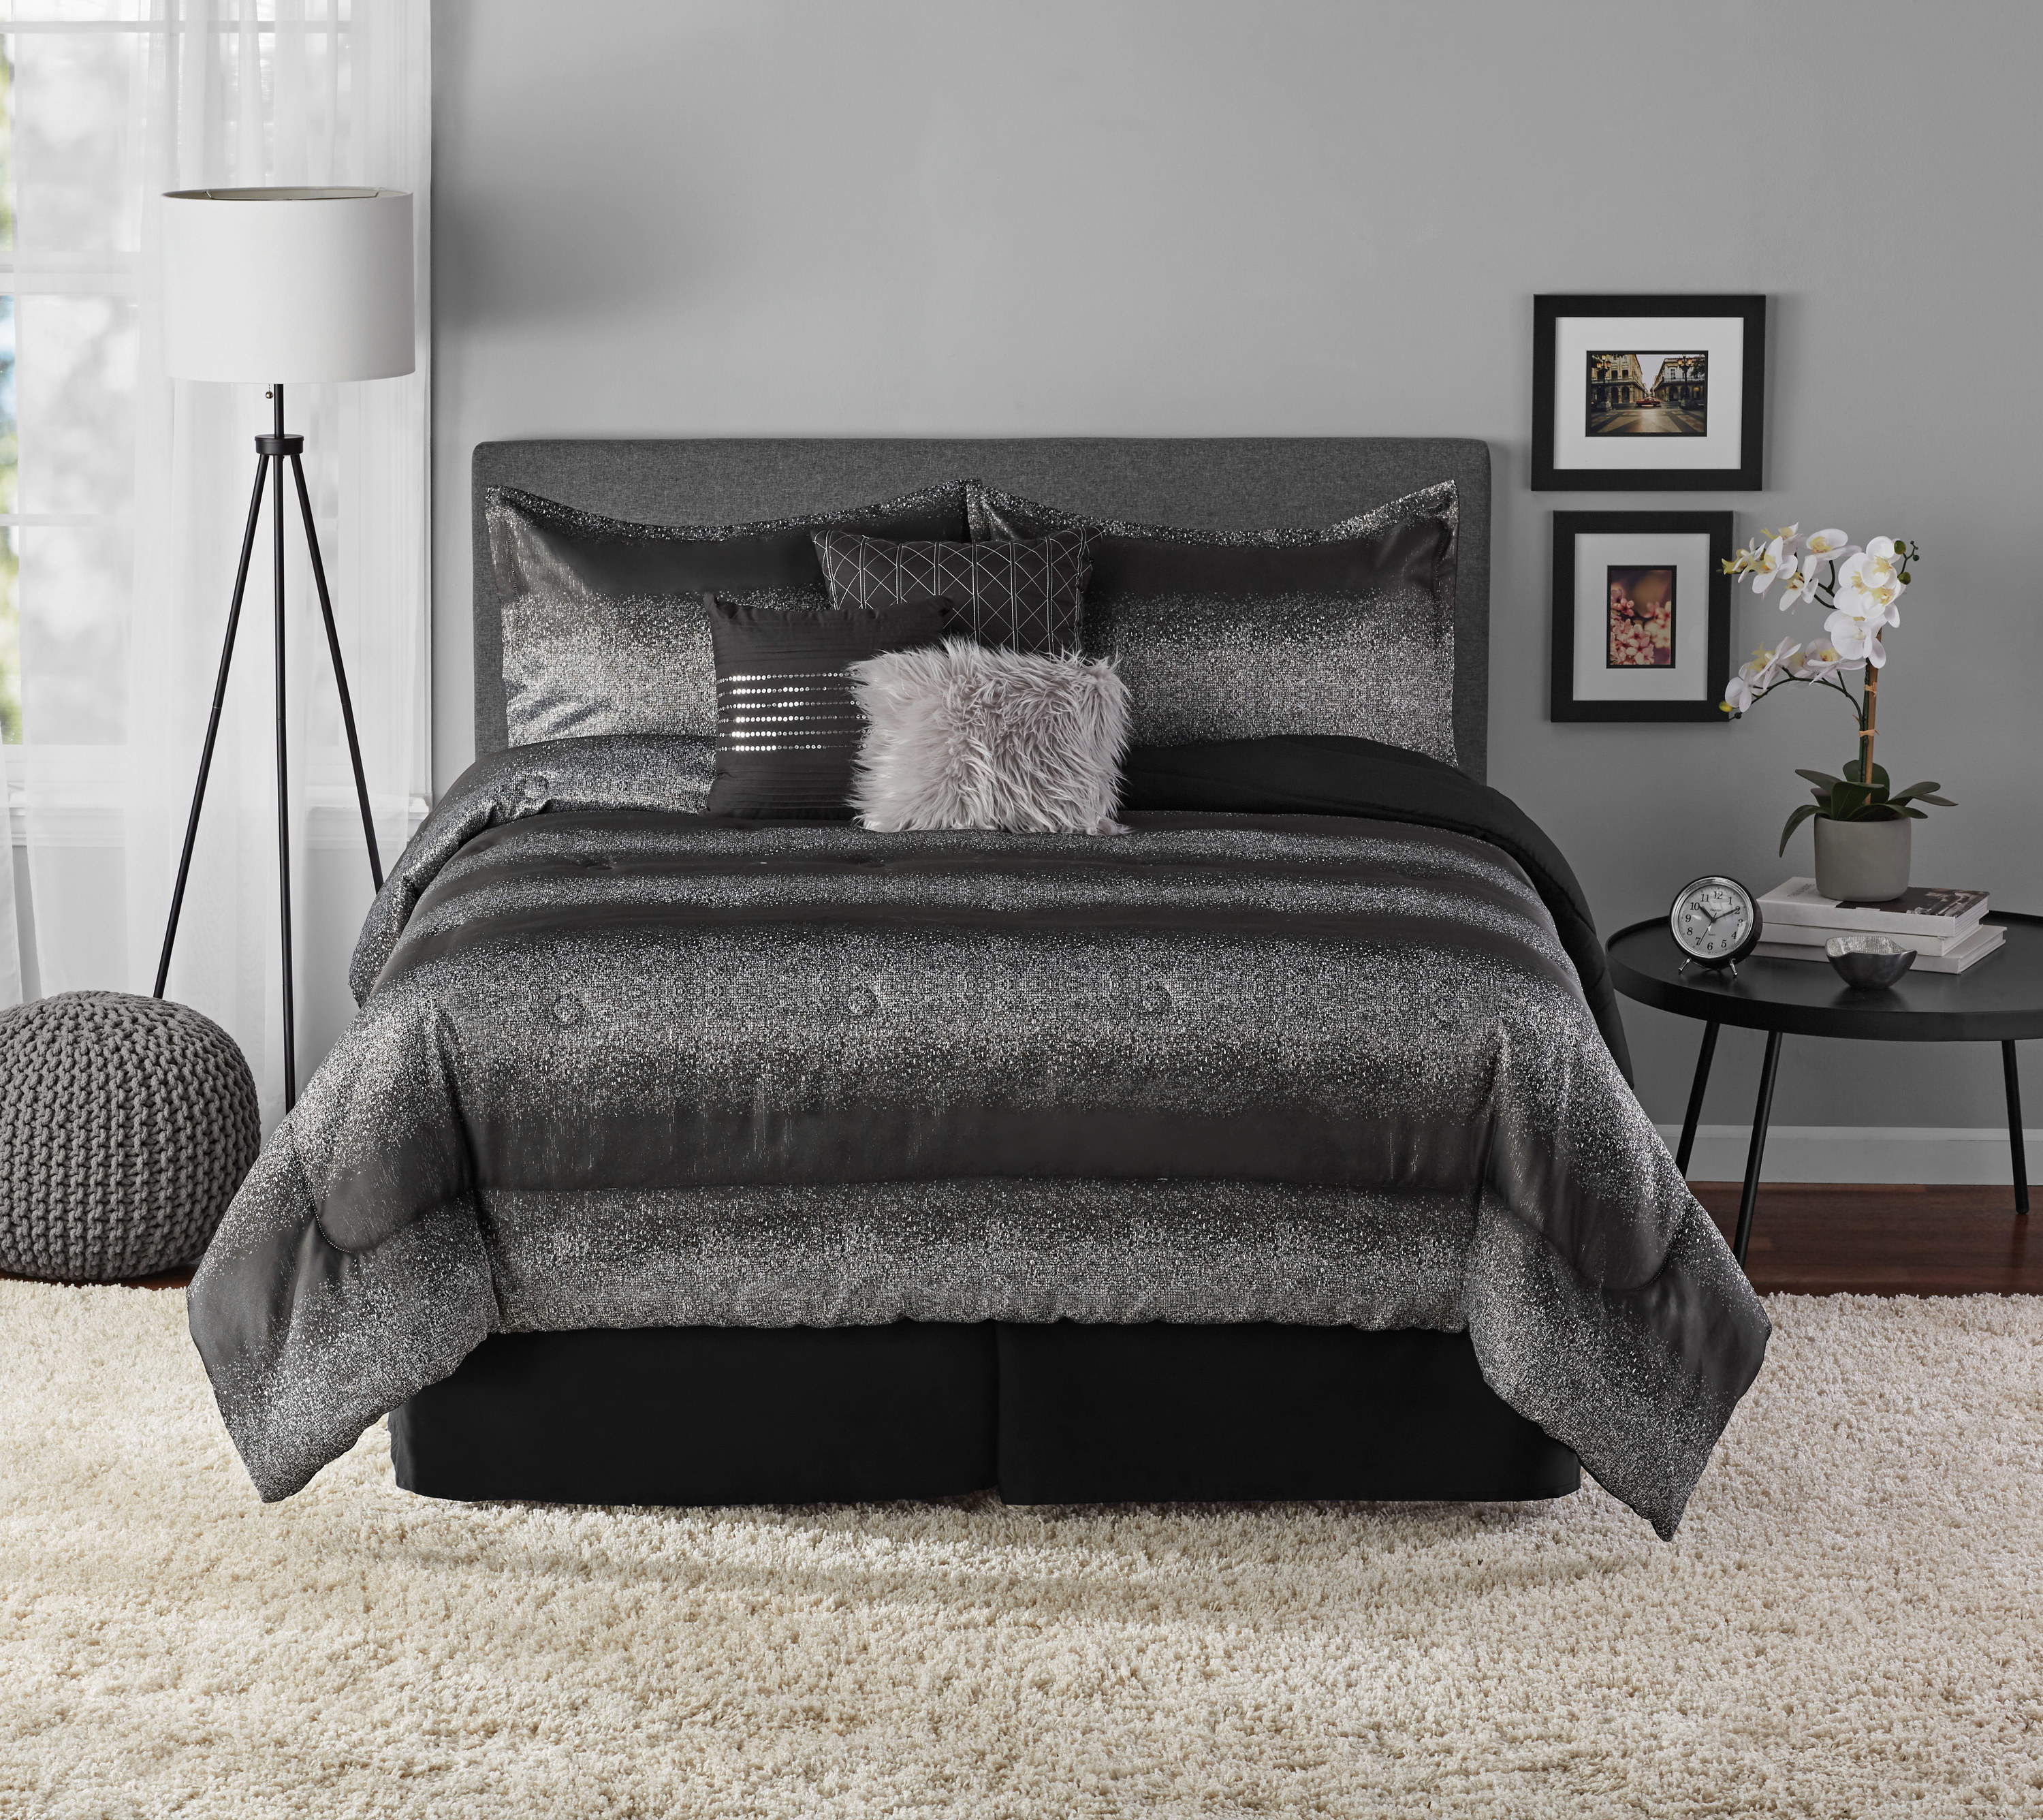 An image of a seven-piece comforter set that includes a comforter, two shams, one bed skirt, and three decorative pillows